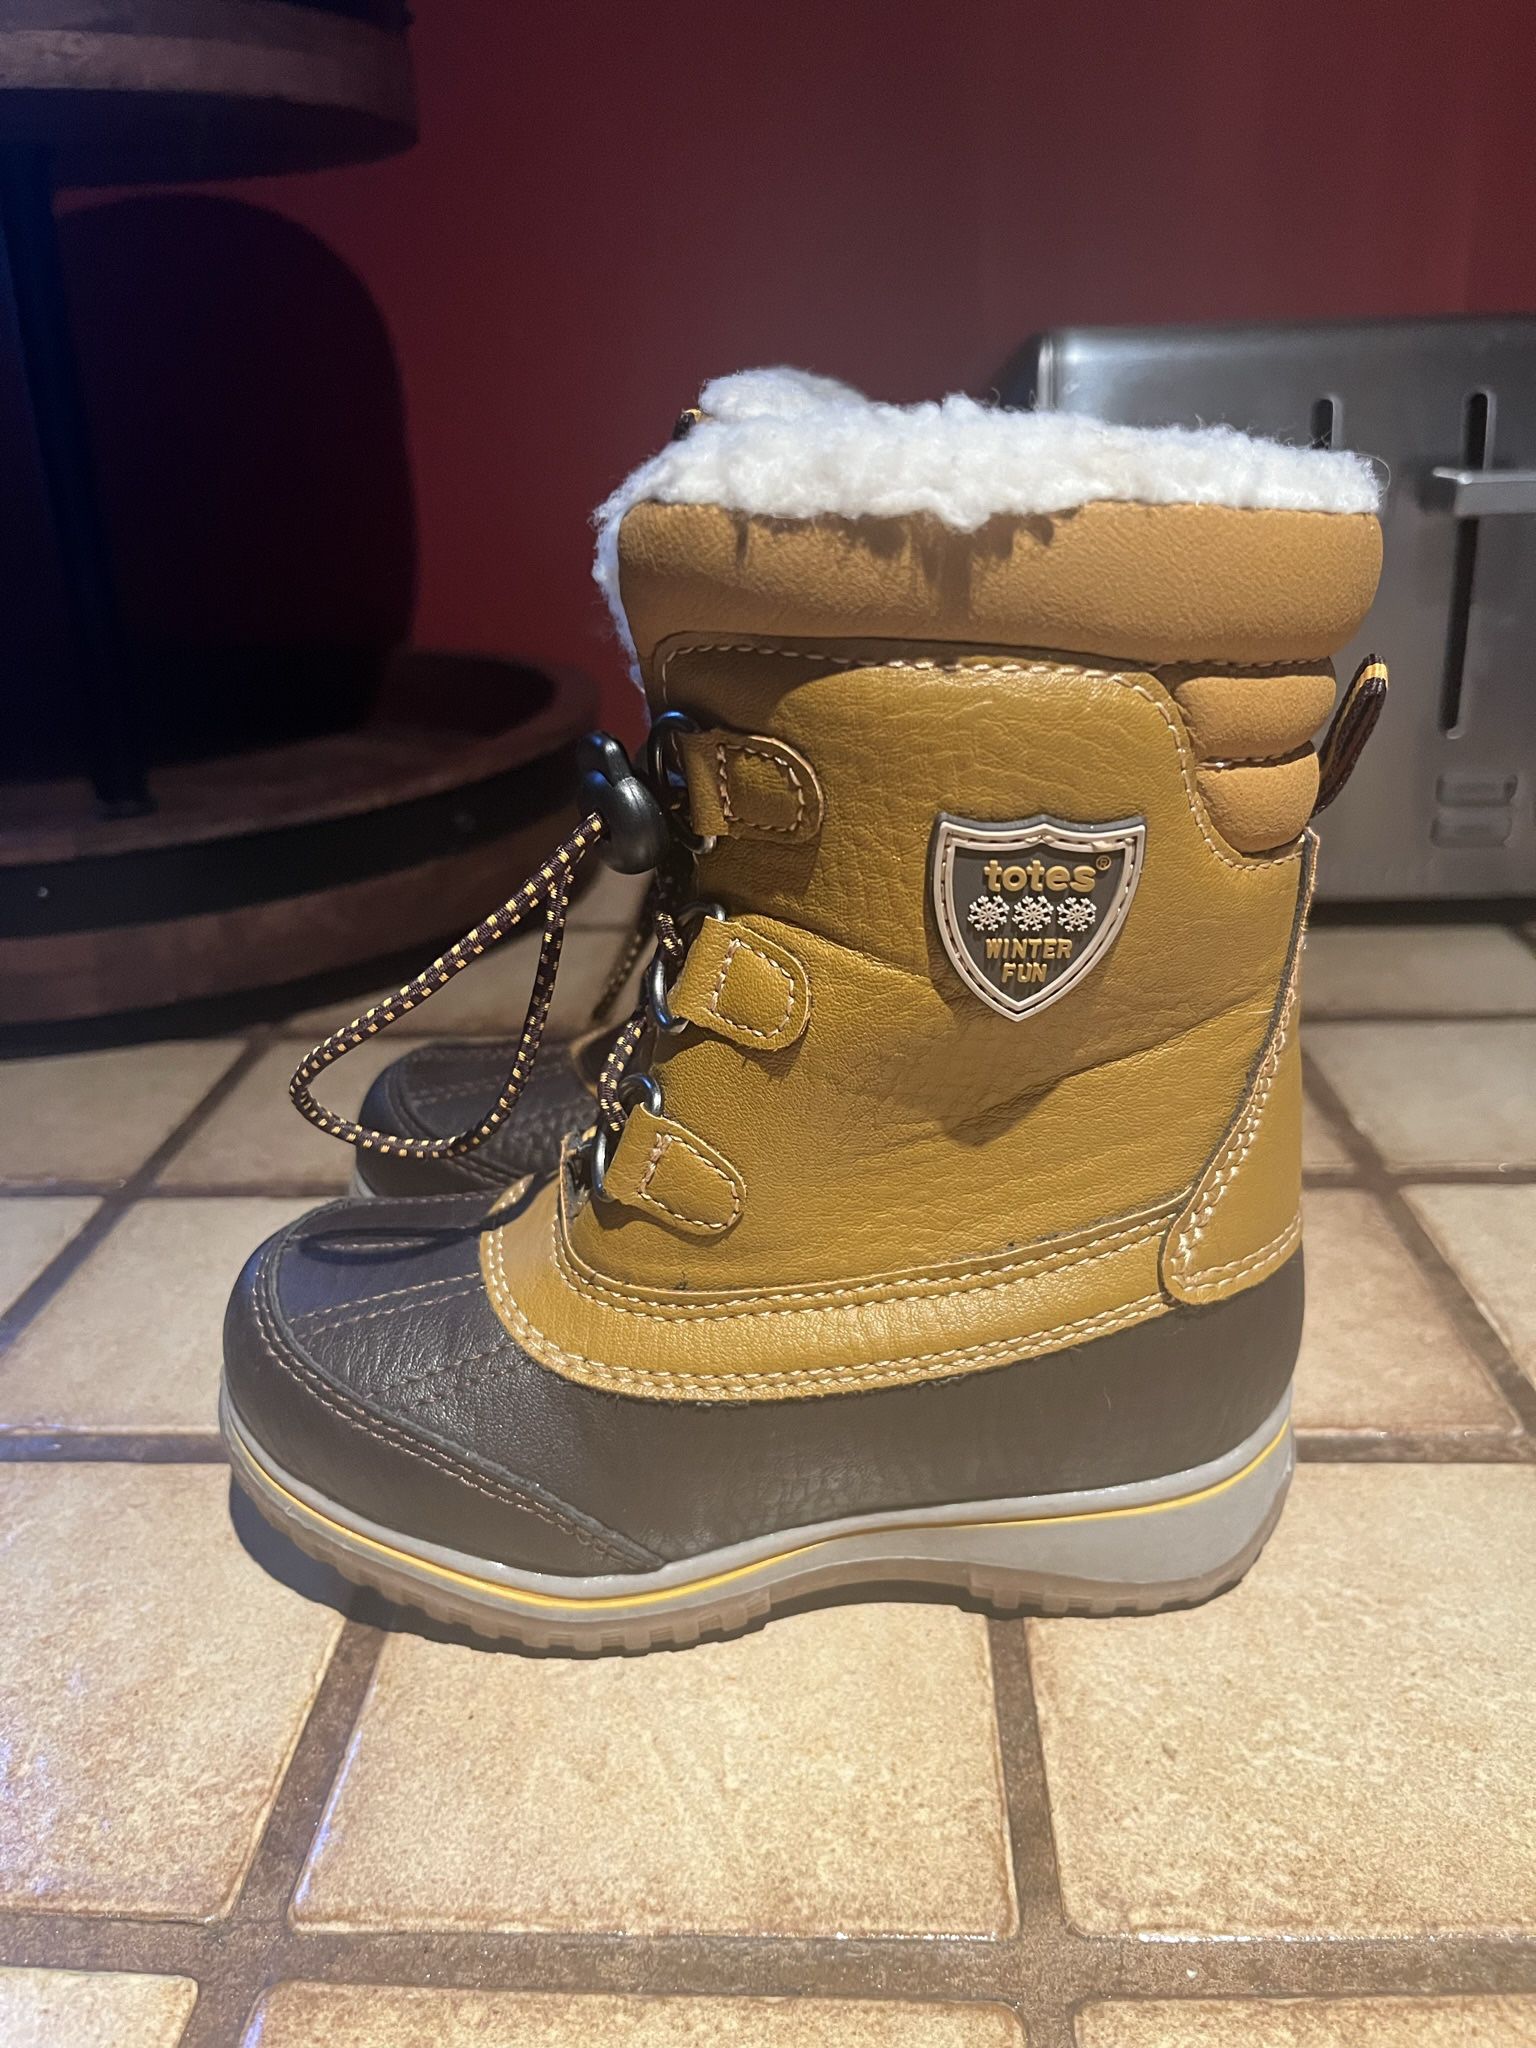 Toddler Boys Size 9 Winter/ Snow Boots